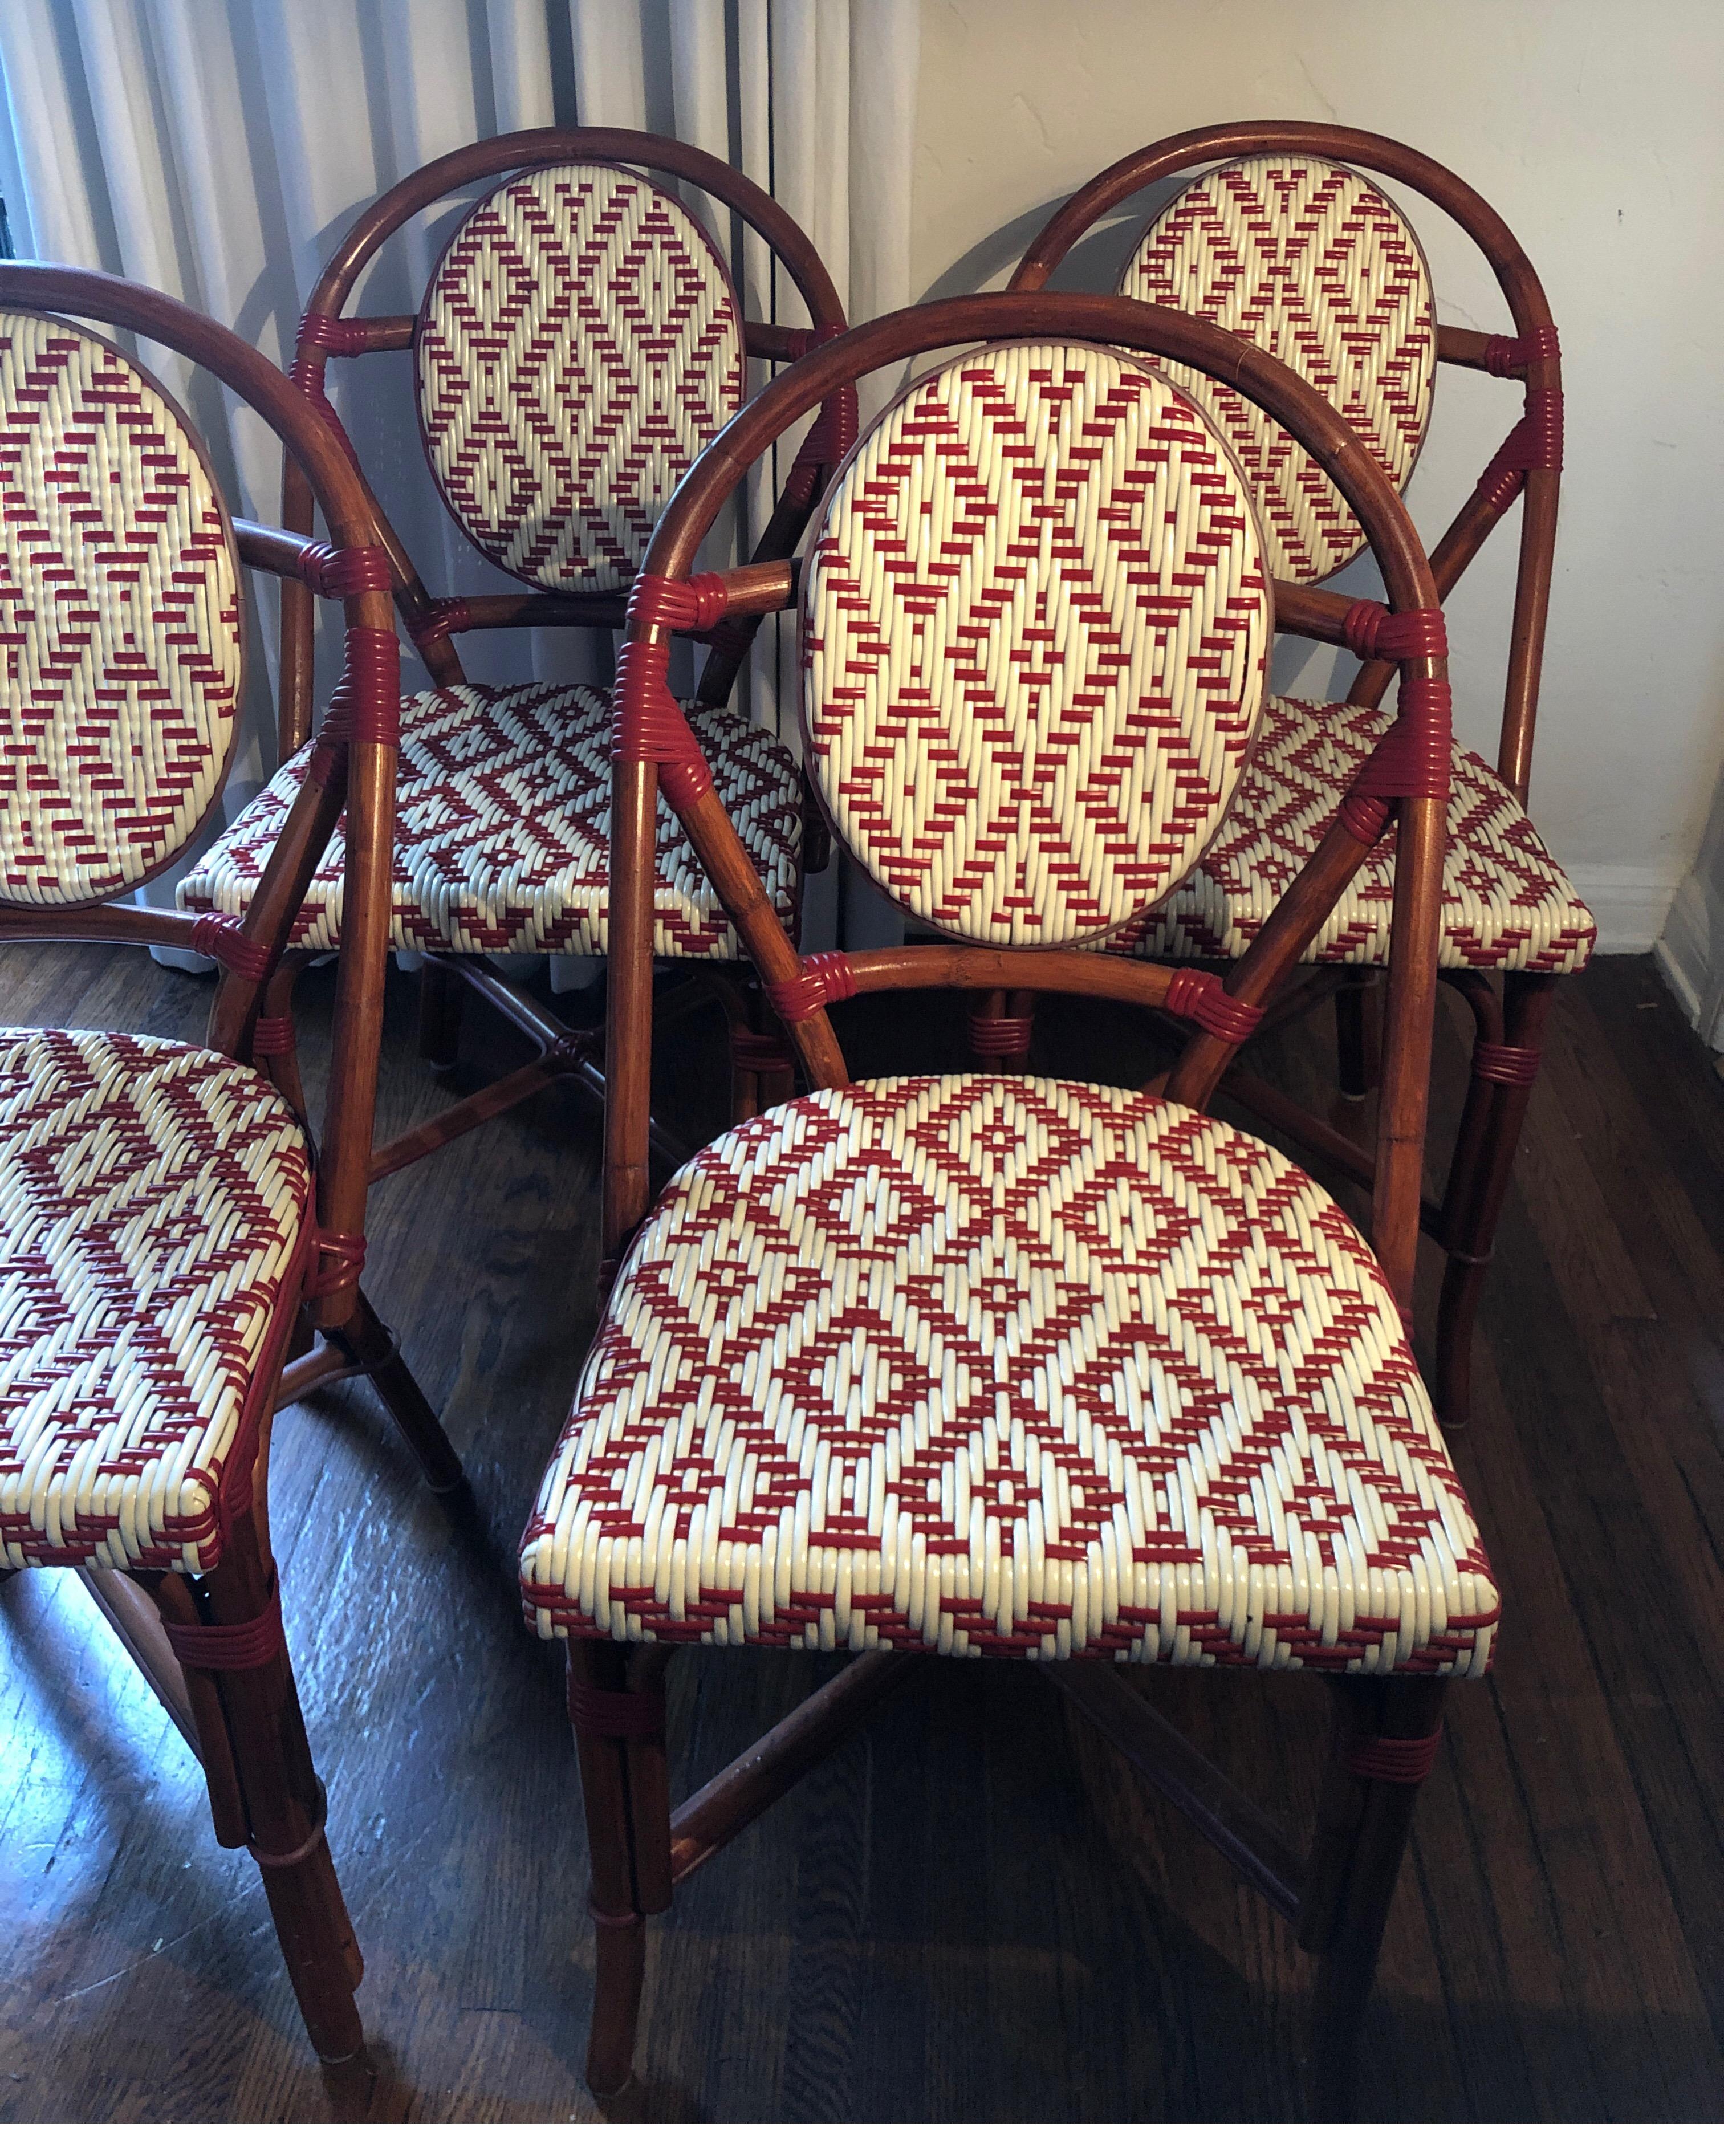 French bistro chairs by Palecek.
Red and white basket weave with bamboo frames.

Overall good used condition. See pics 
Some loss on the legs and loose pieces of resin around legs.